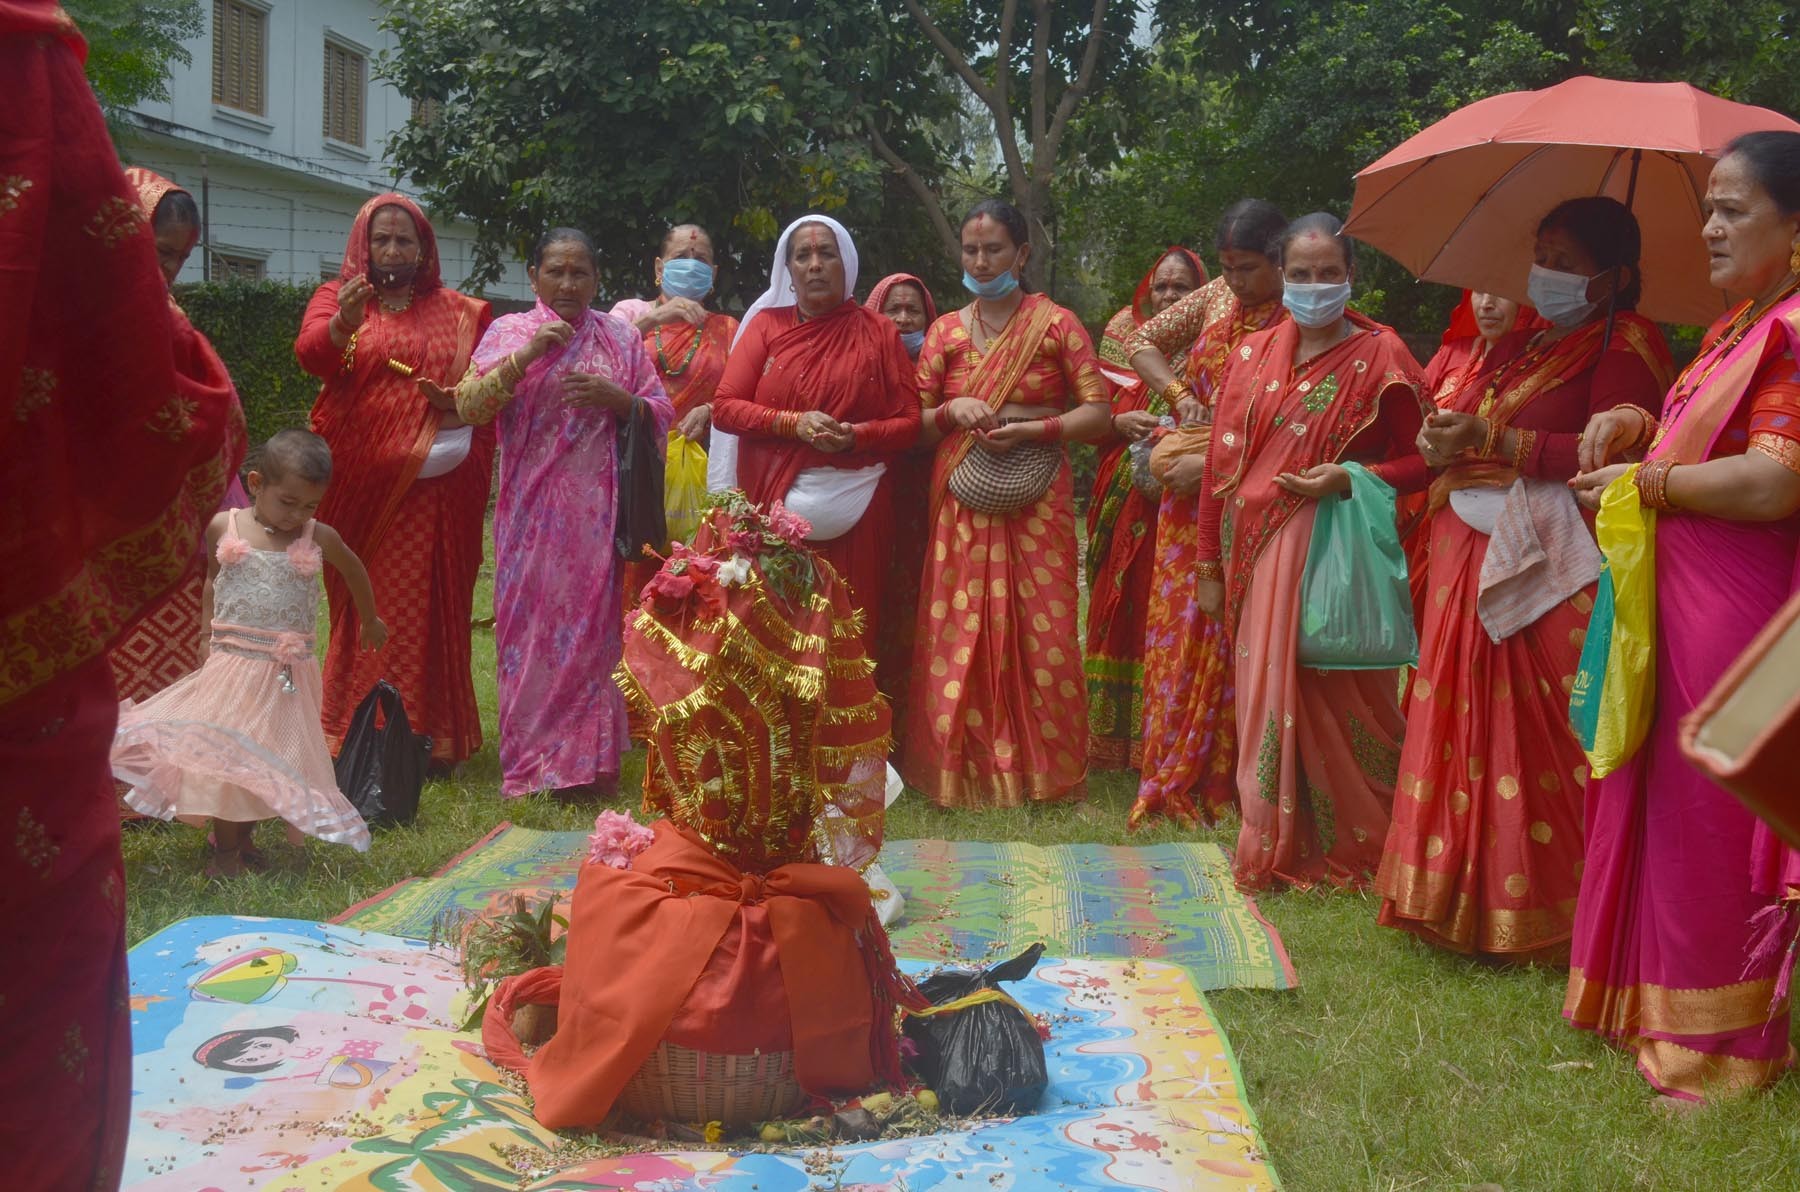 puja-during-gaura-festivalo-in-nepal